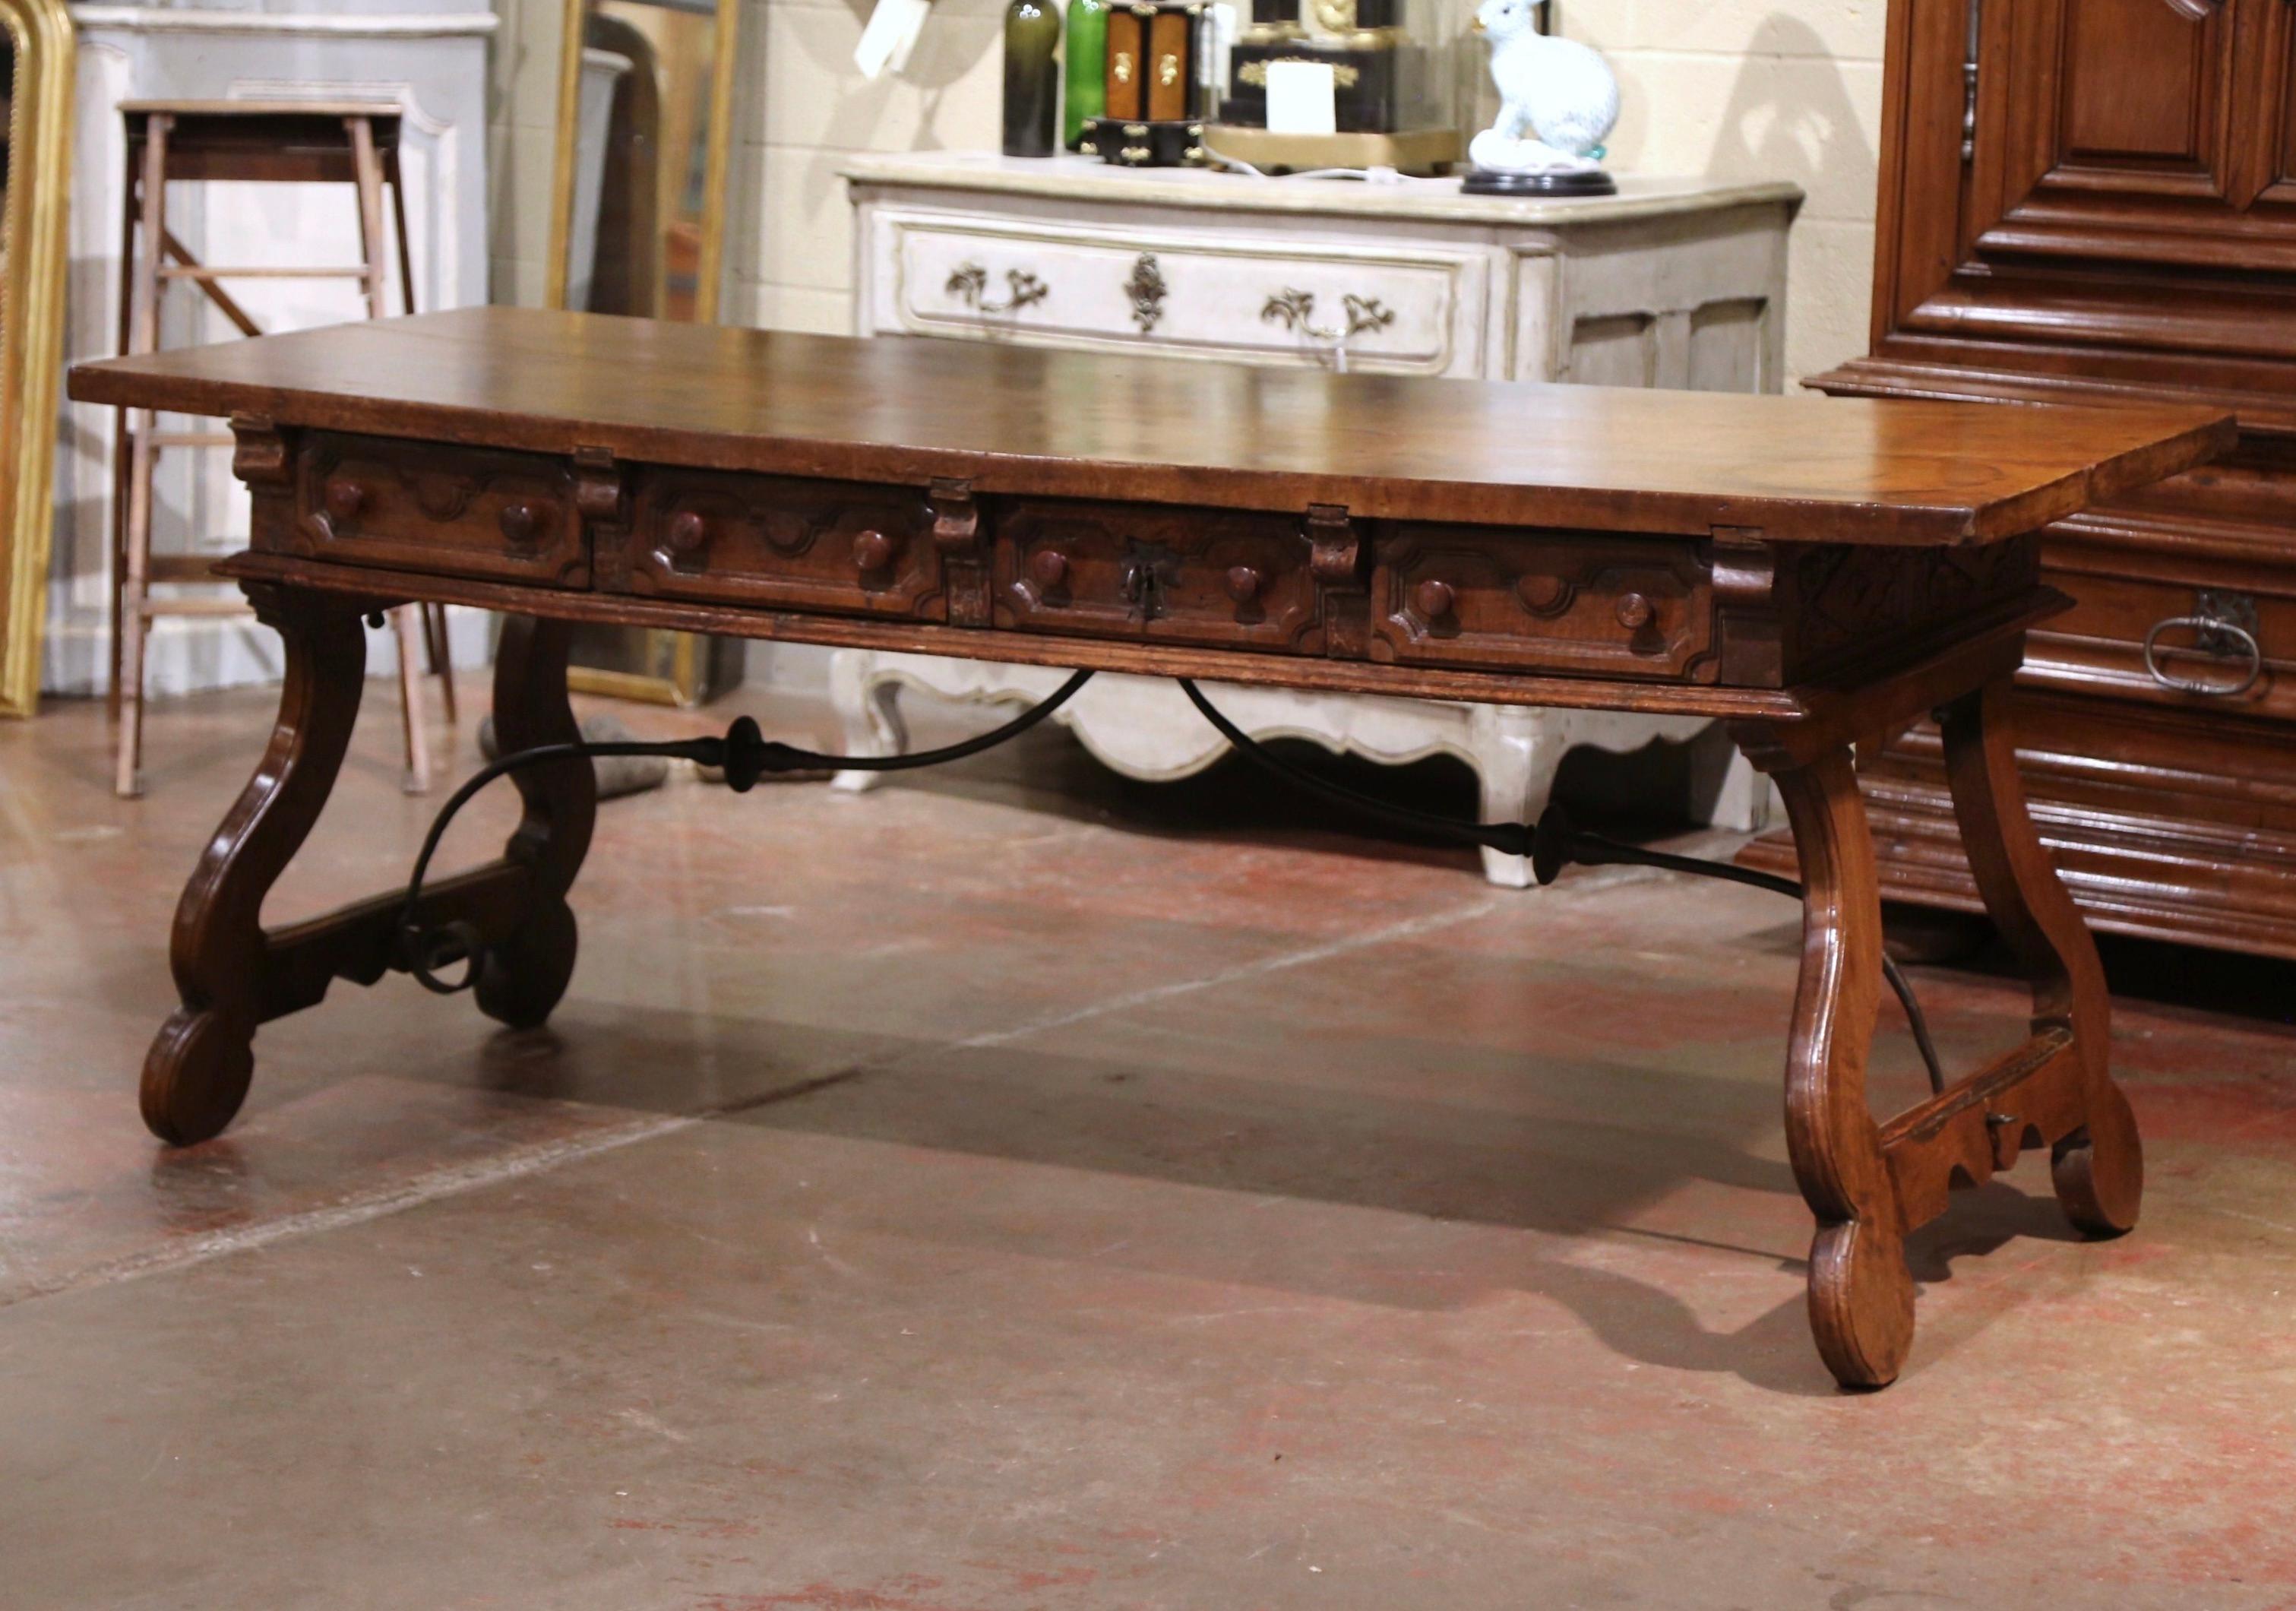 Add an elegant focal point to your study or library with this antique Spanish carved fruitwood desk. Carved in Spain circa 1750, the trestle table stands on two intricate carved legs, connected with a thick, forged wrought iron stretcher. The desk